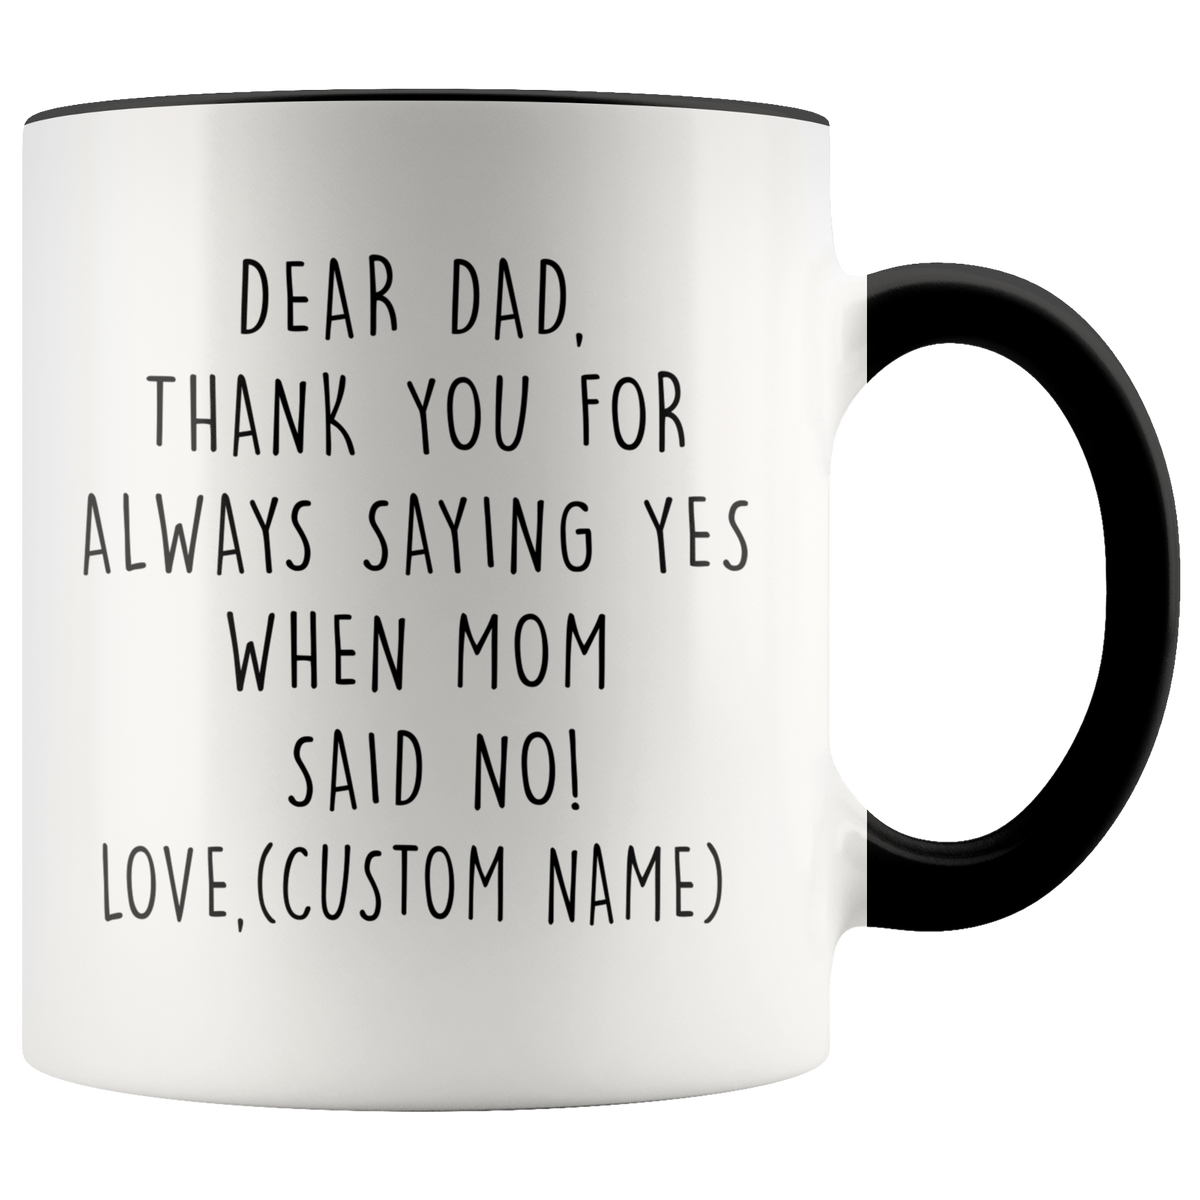 Funny Mug For Dad - Thank You For Always Saying Yes Accent Coffee Mug 11oz